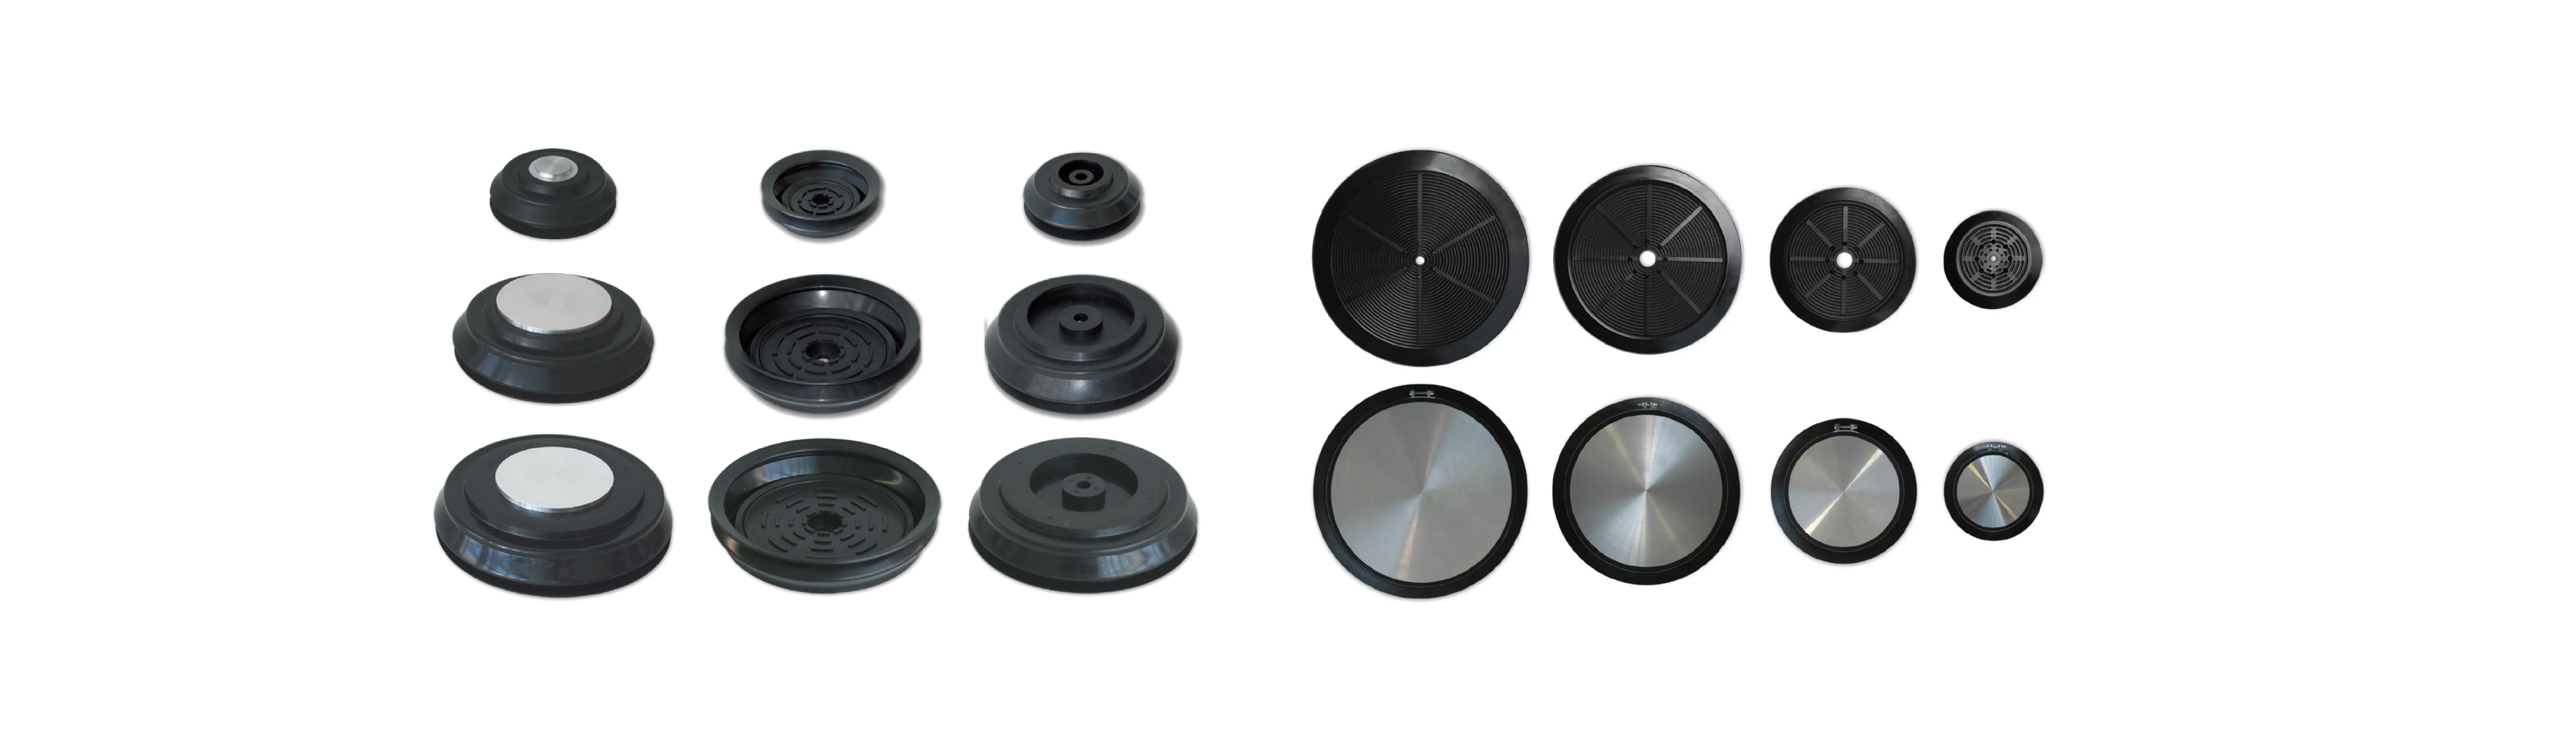 Industrial Suction Cups and Components